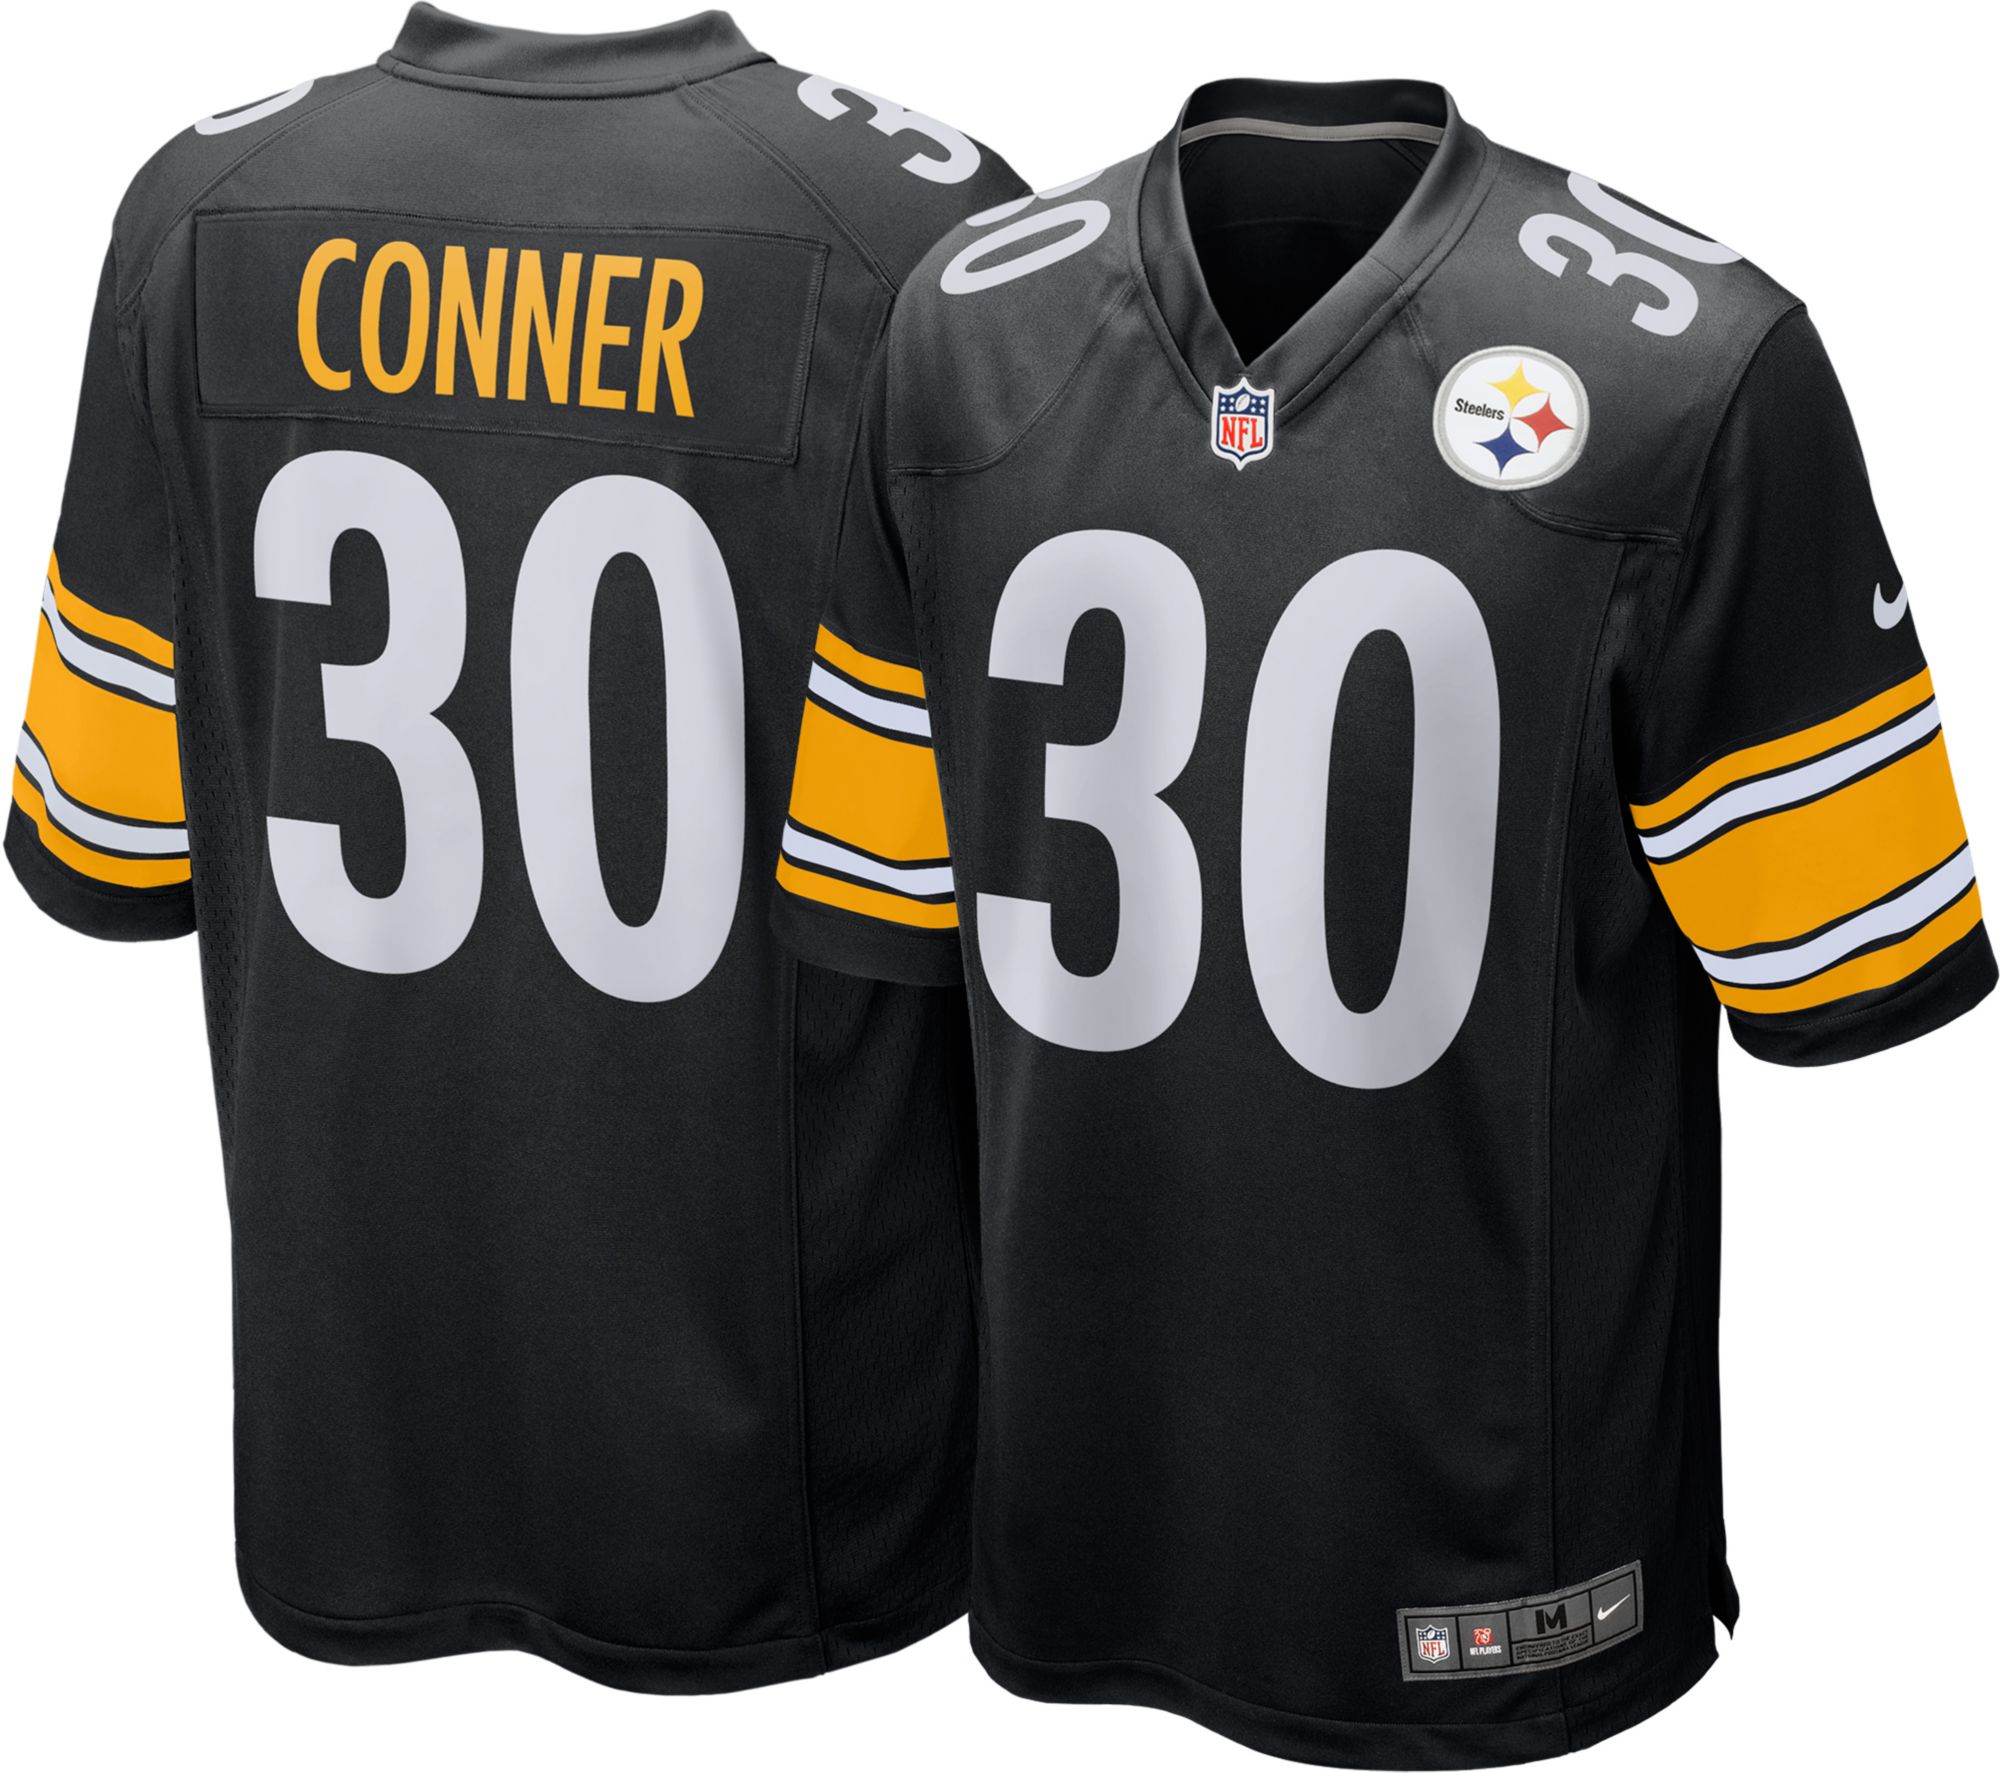 conner jersey